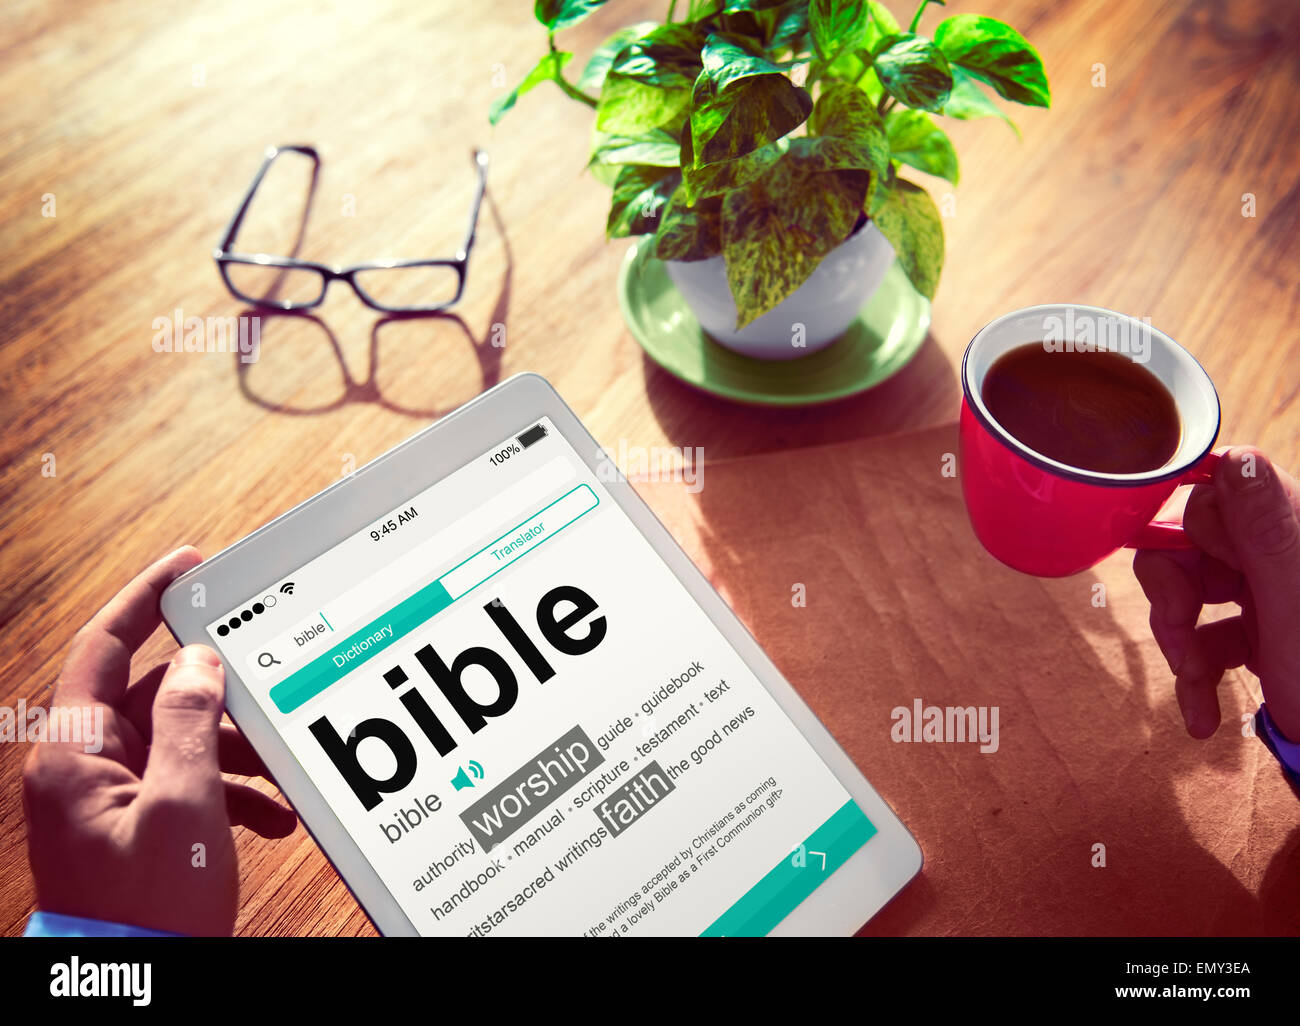 Man Reading the Definition of Bible Stock Photo